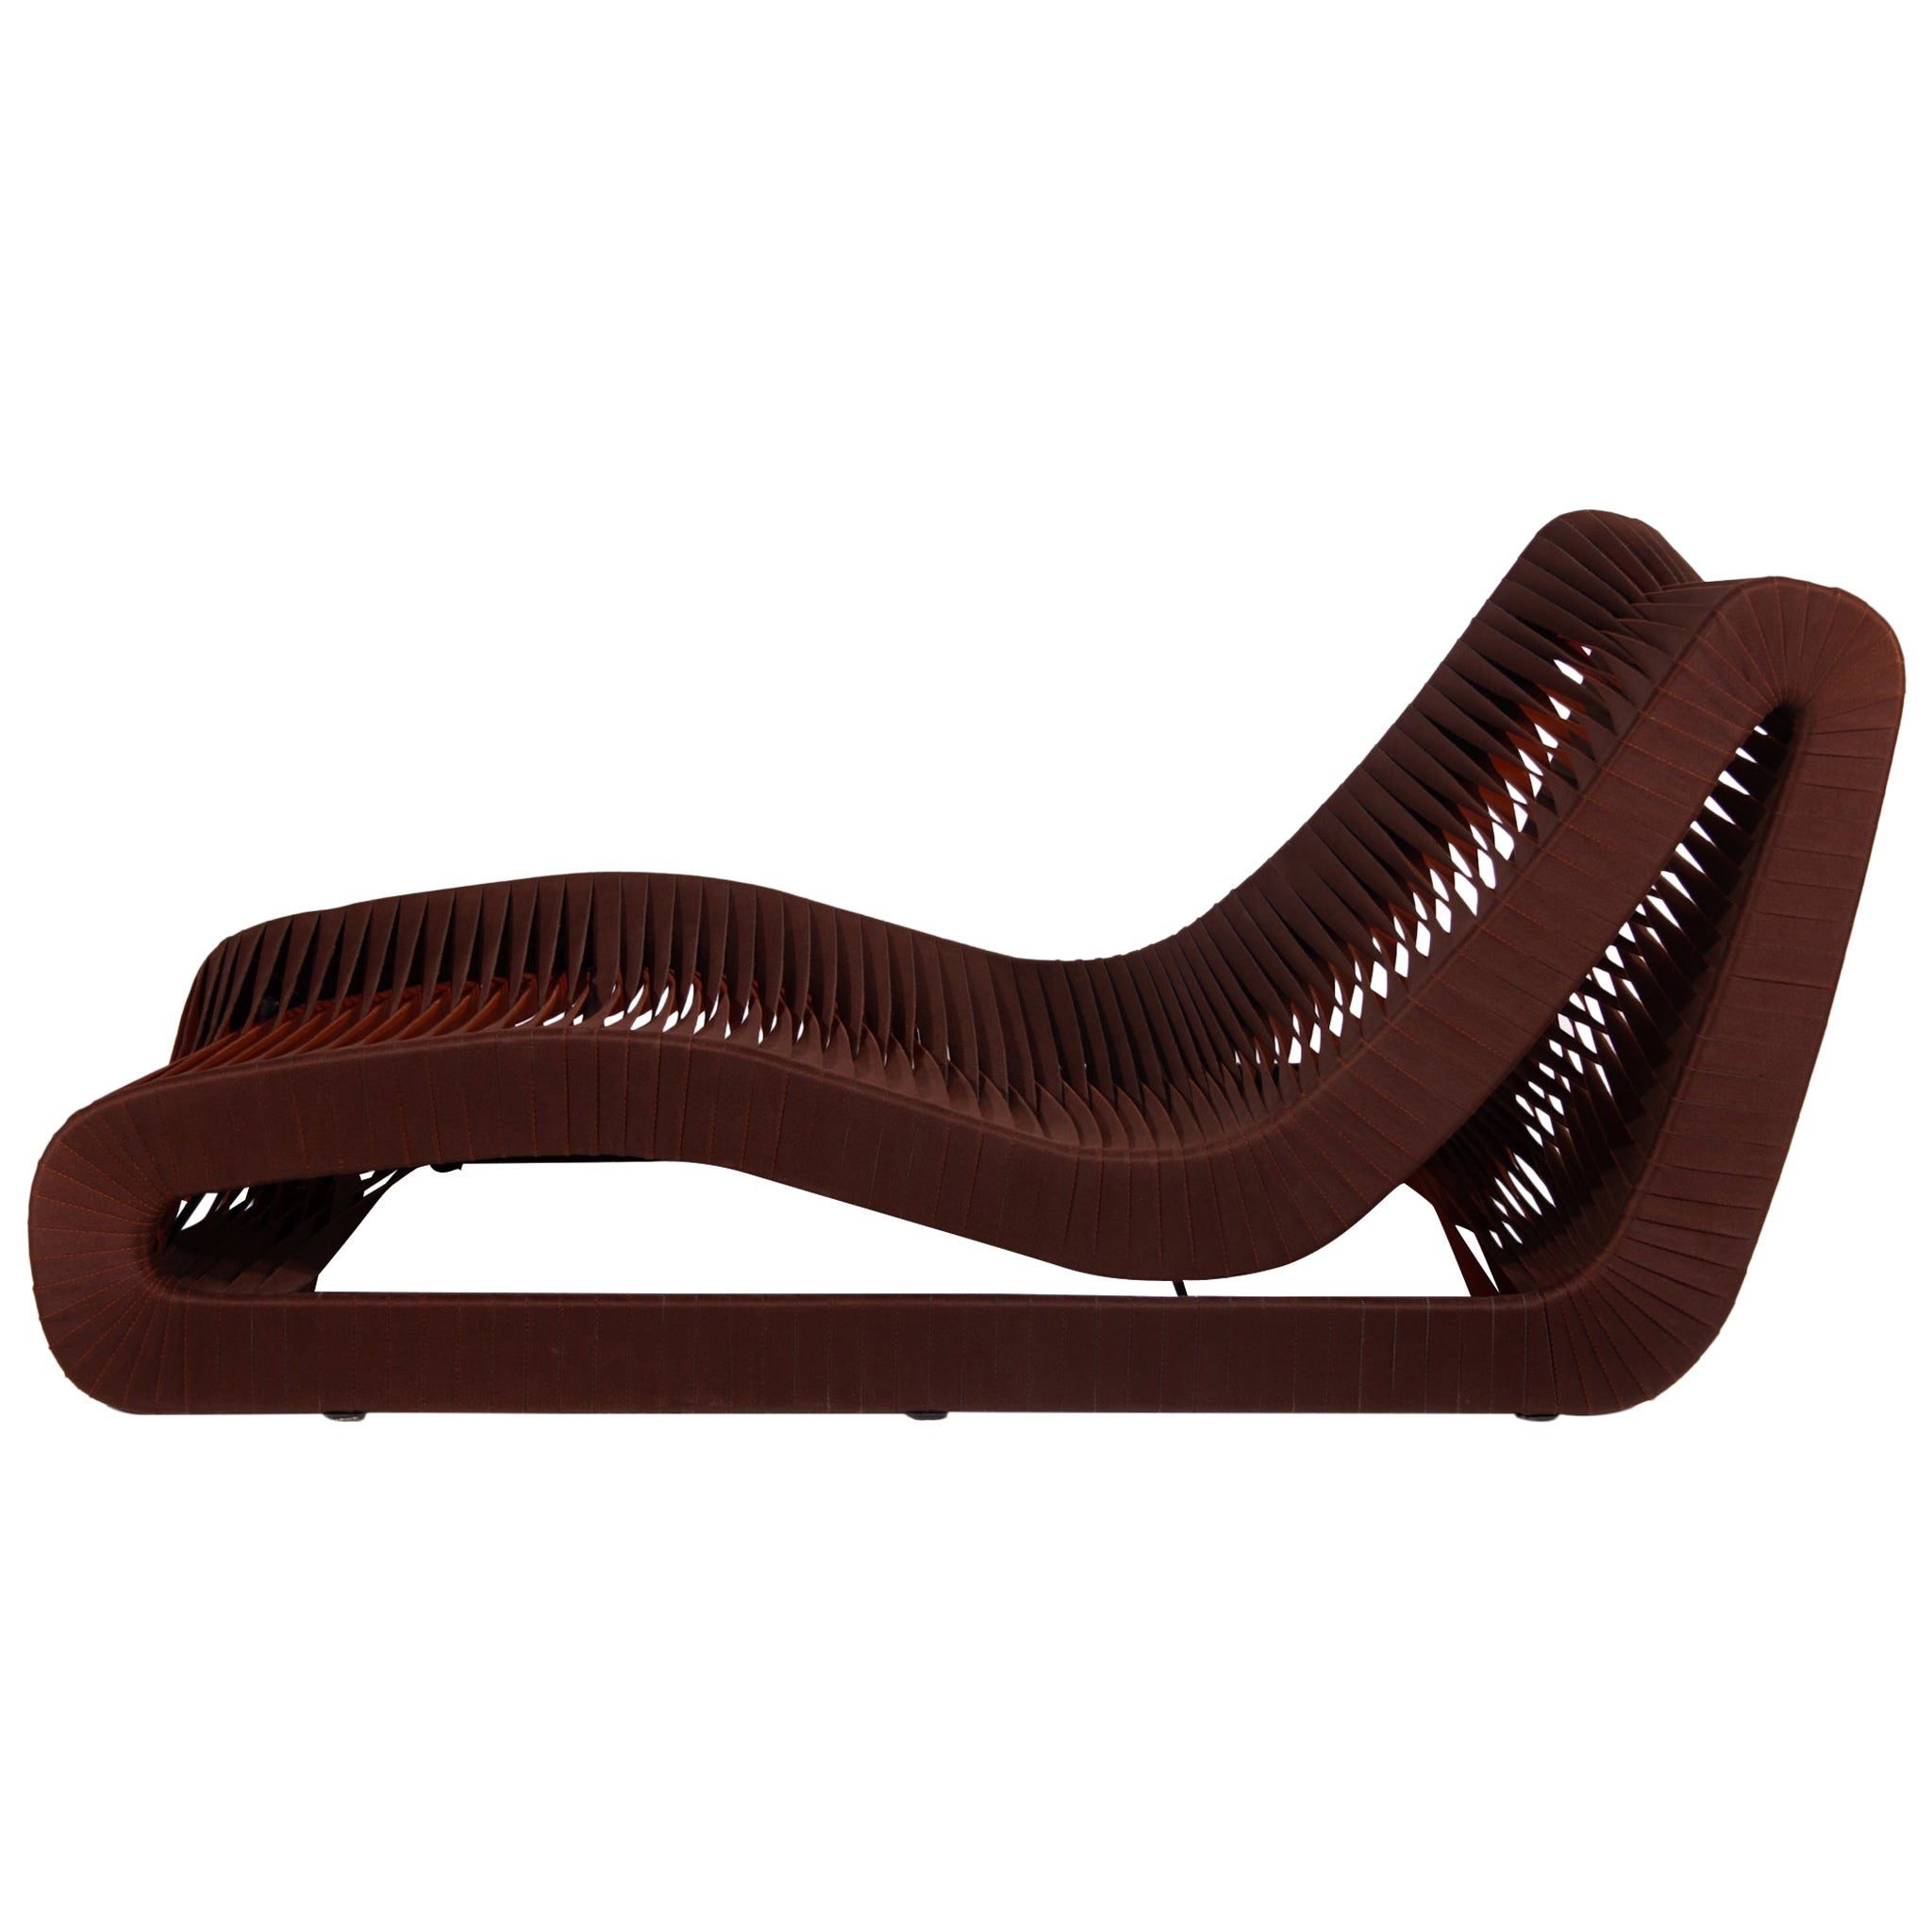 An ergonomic Daybed, Chaise lounge exquisite texture, functional simplicity. The Chaise Lounge captures contemporary design with its ideal balance between form and function takes the chaise lounge concept to the next level. Its light and curved